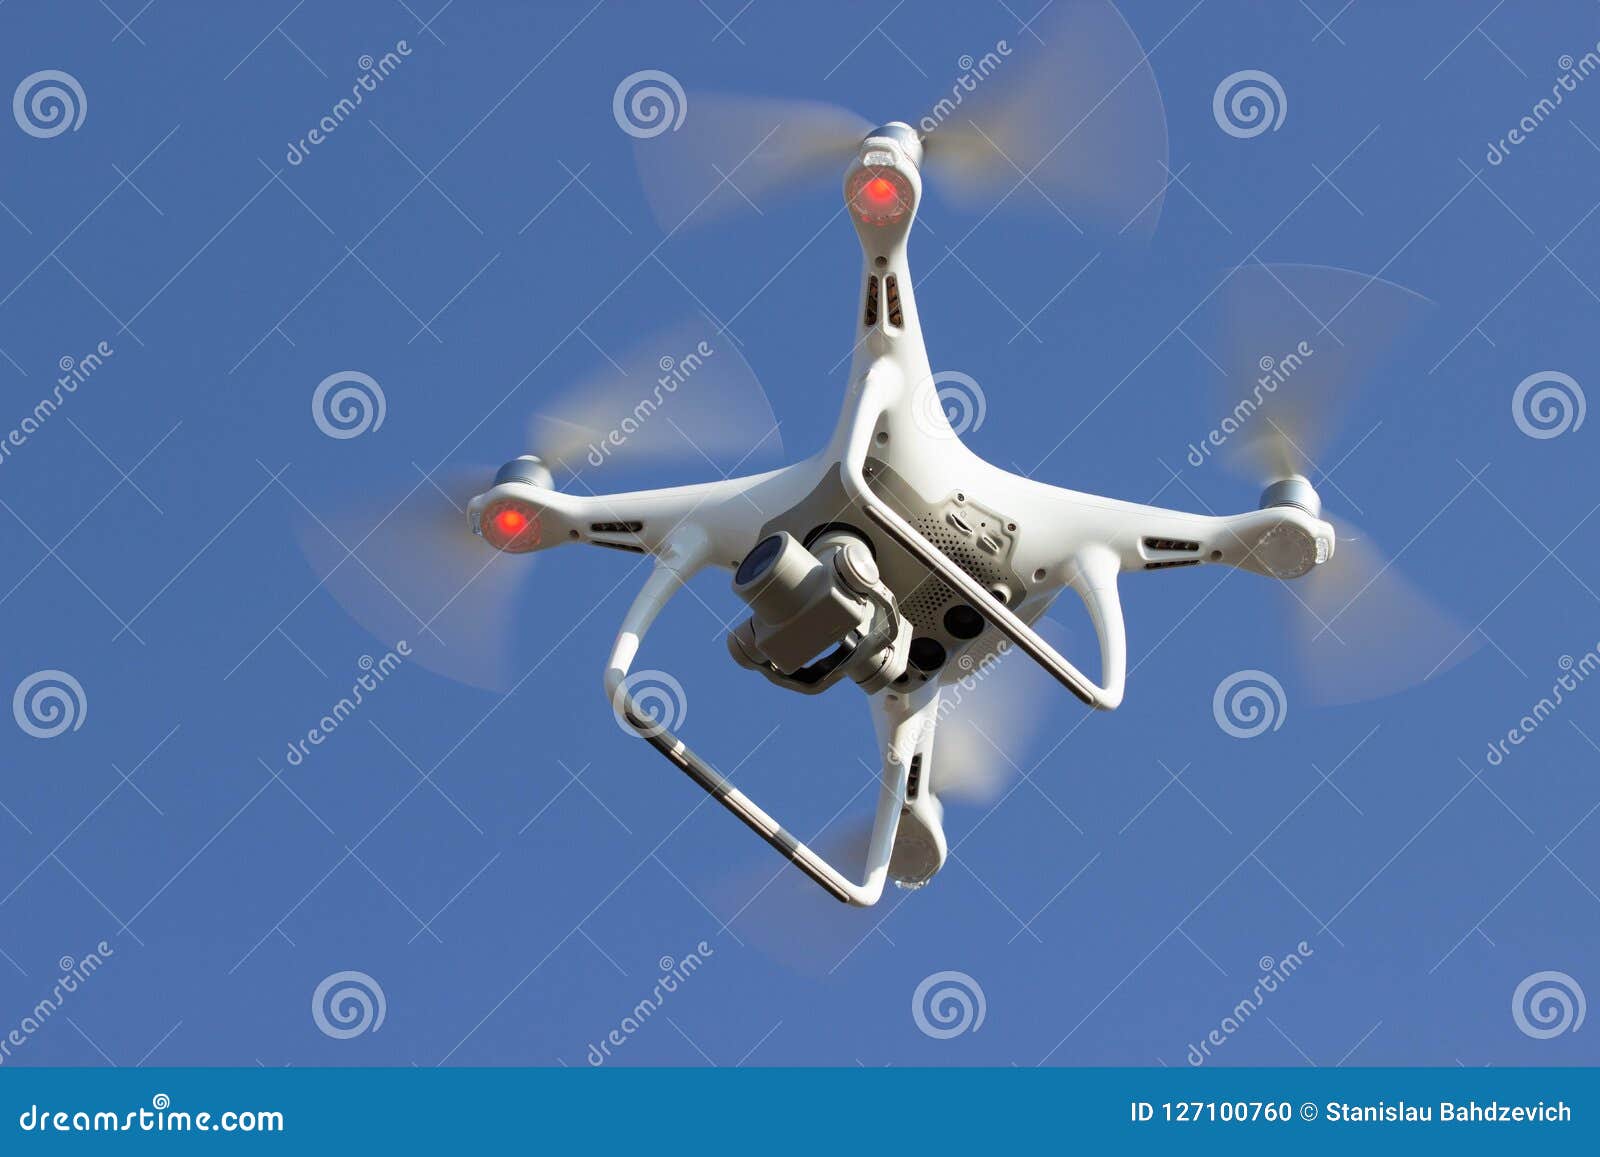 white flying dron with camera on blue sky background